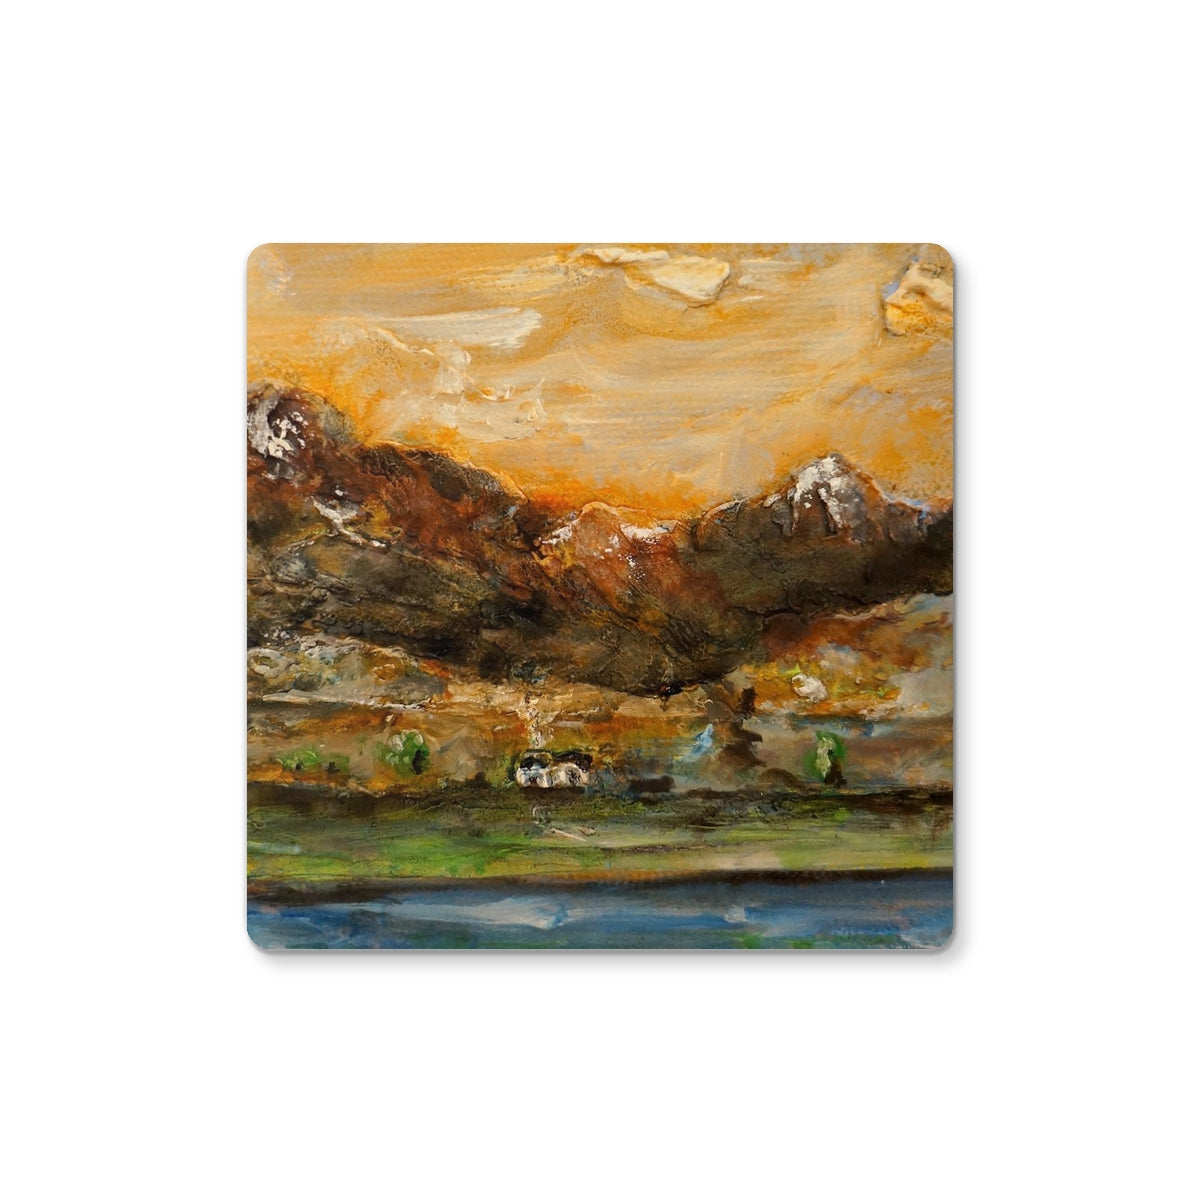 A Glencoe Cottage Art Gifts Coaster-Coasters-Glencoe Art Gallery-2 Coasters-Paintings, Prints, Homeware, Art Gifts From Scotland By Scottish Artist Kevin Hunter